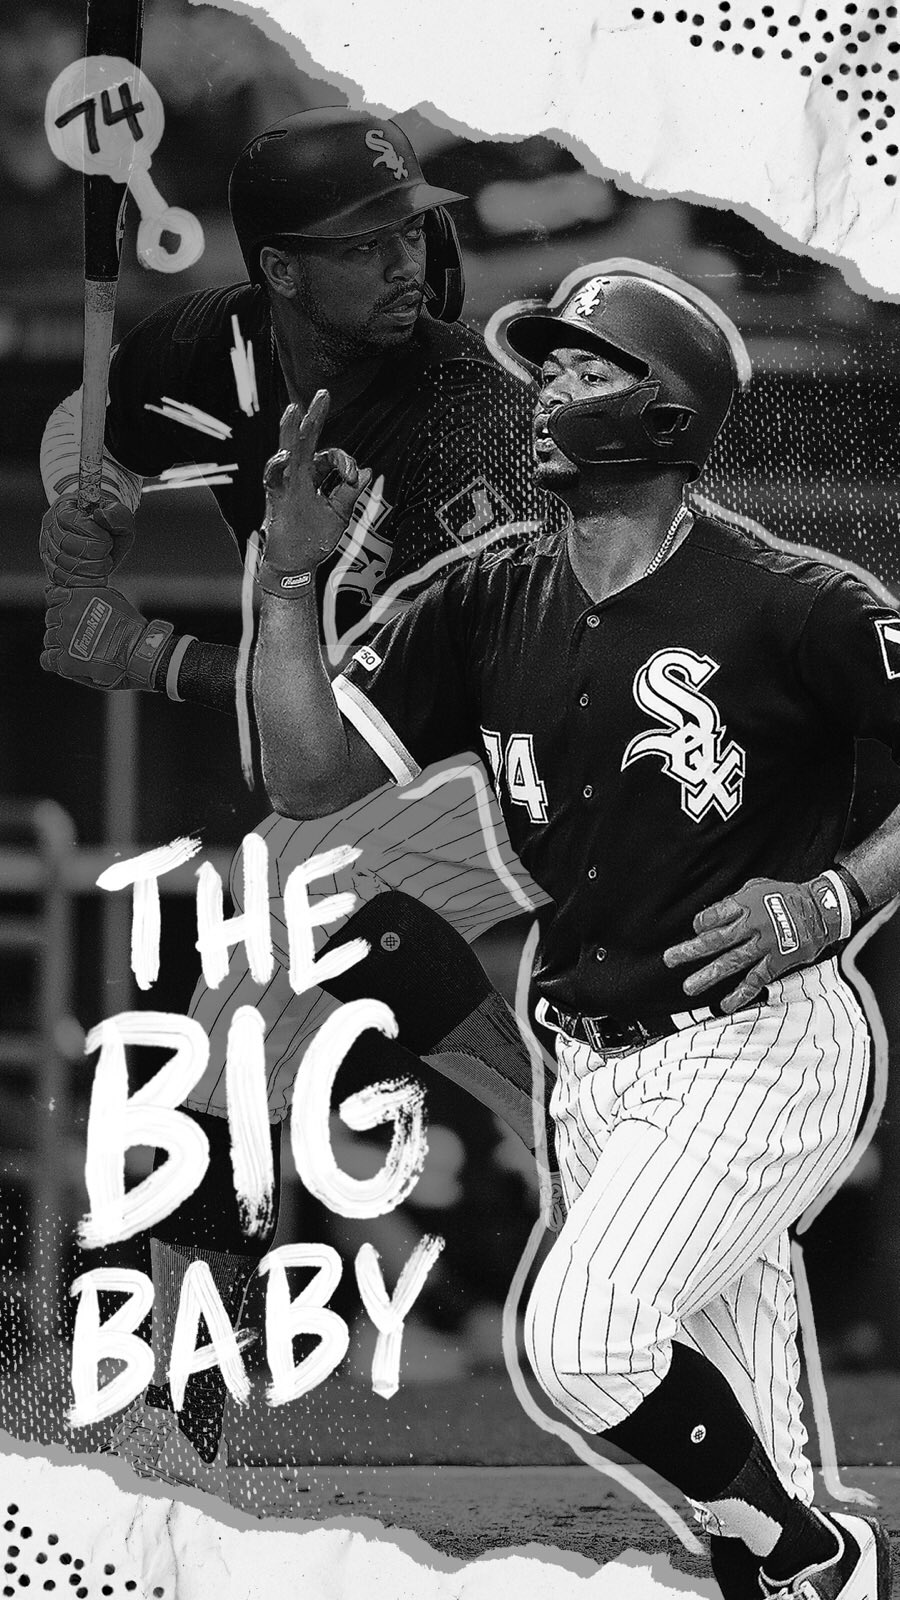 Wallpaper Wednesday. It's Wallpaper Wednesday! Looking for a…, by Chicago White  Sox